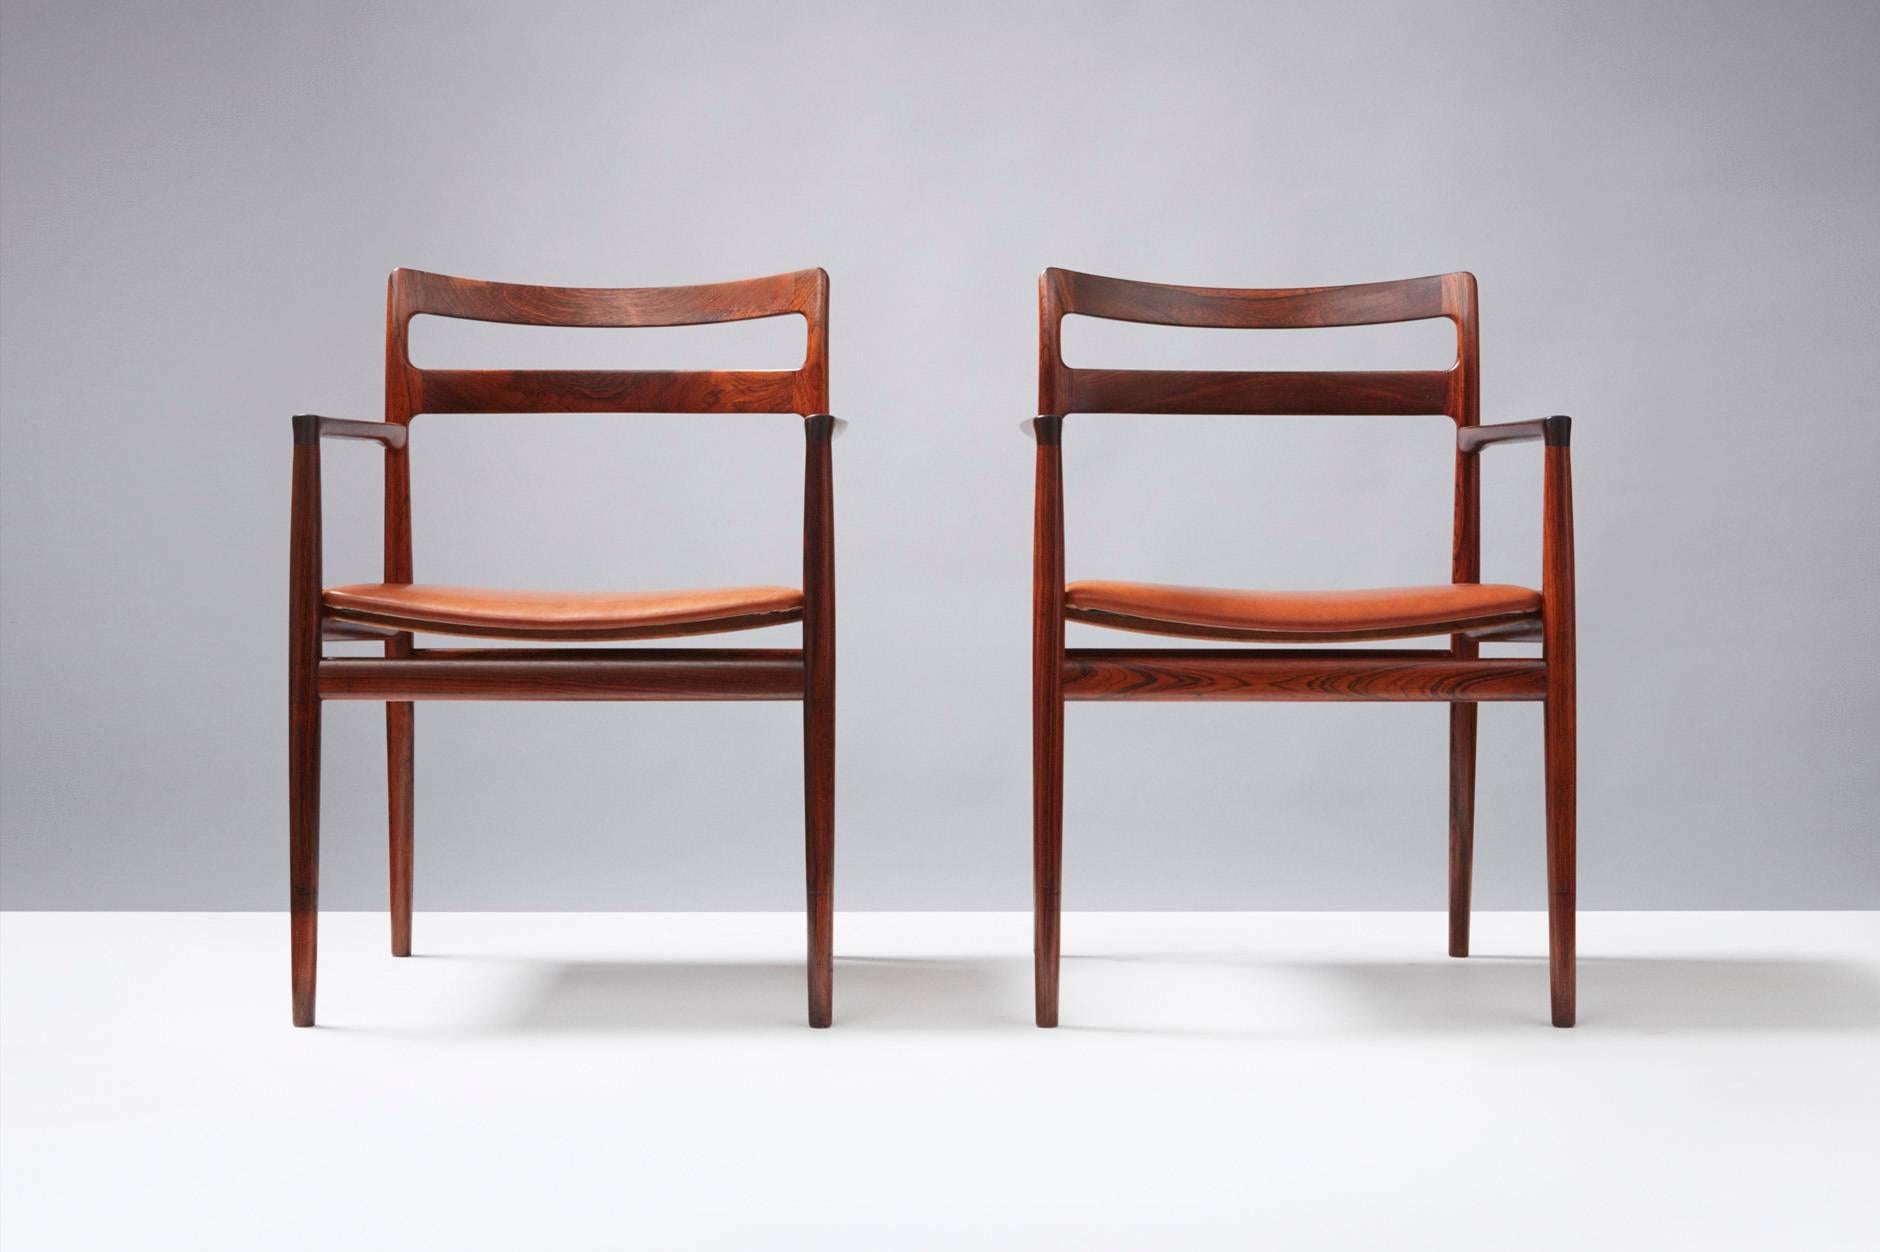 Rosewood armchairs attributed to Johannes Norgaard and produced by Norgaard Mobelfabrik, Denmark. New, aniline cognac brown leather seats.
  